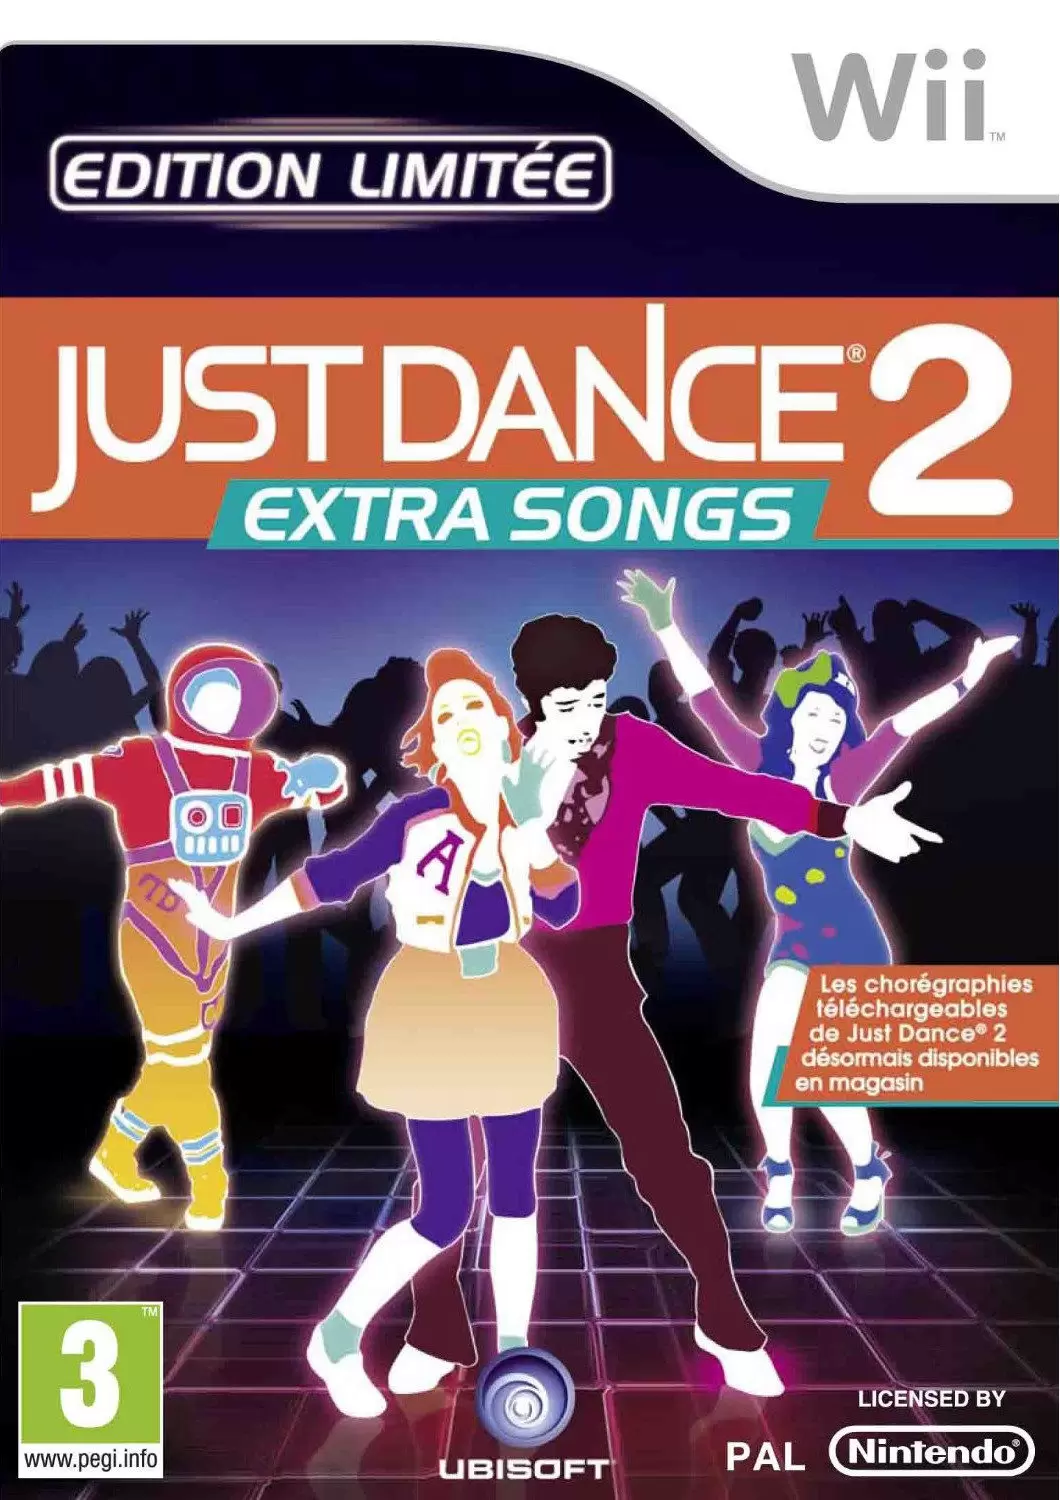 Nintendo Wii Games - Just Dance 2 : Extra Songs